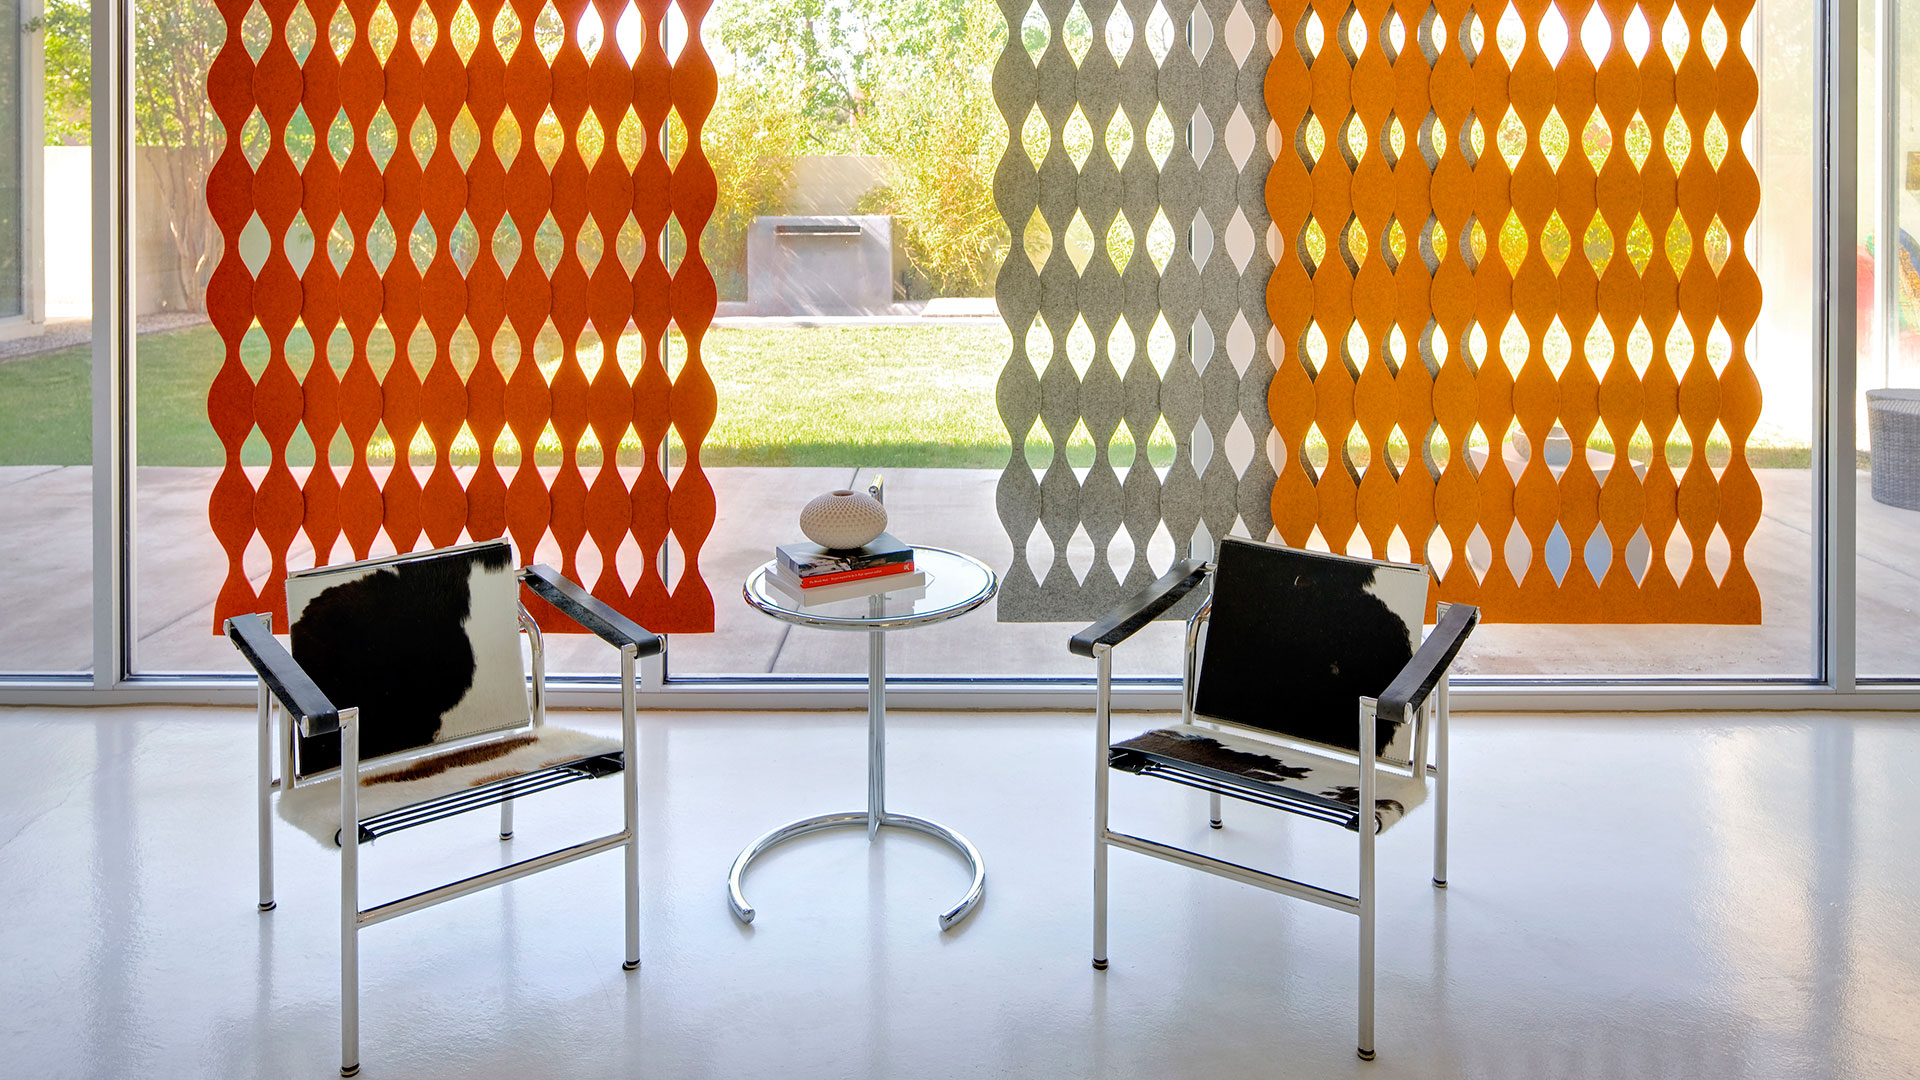 Gray red and orange curvy felt screens next to large window with two cow hide chairs